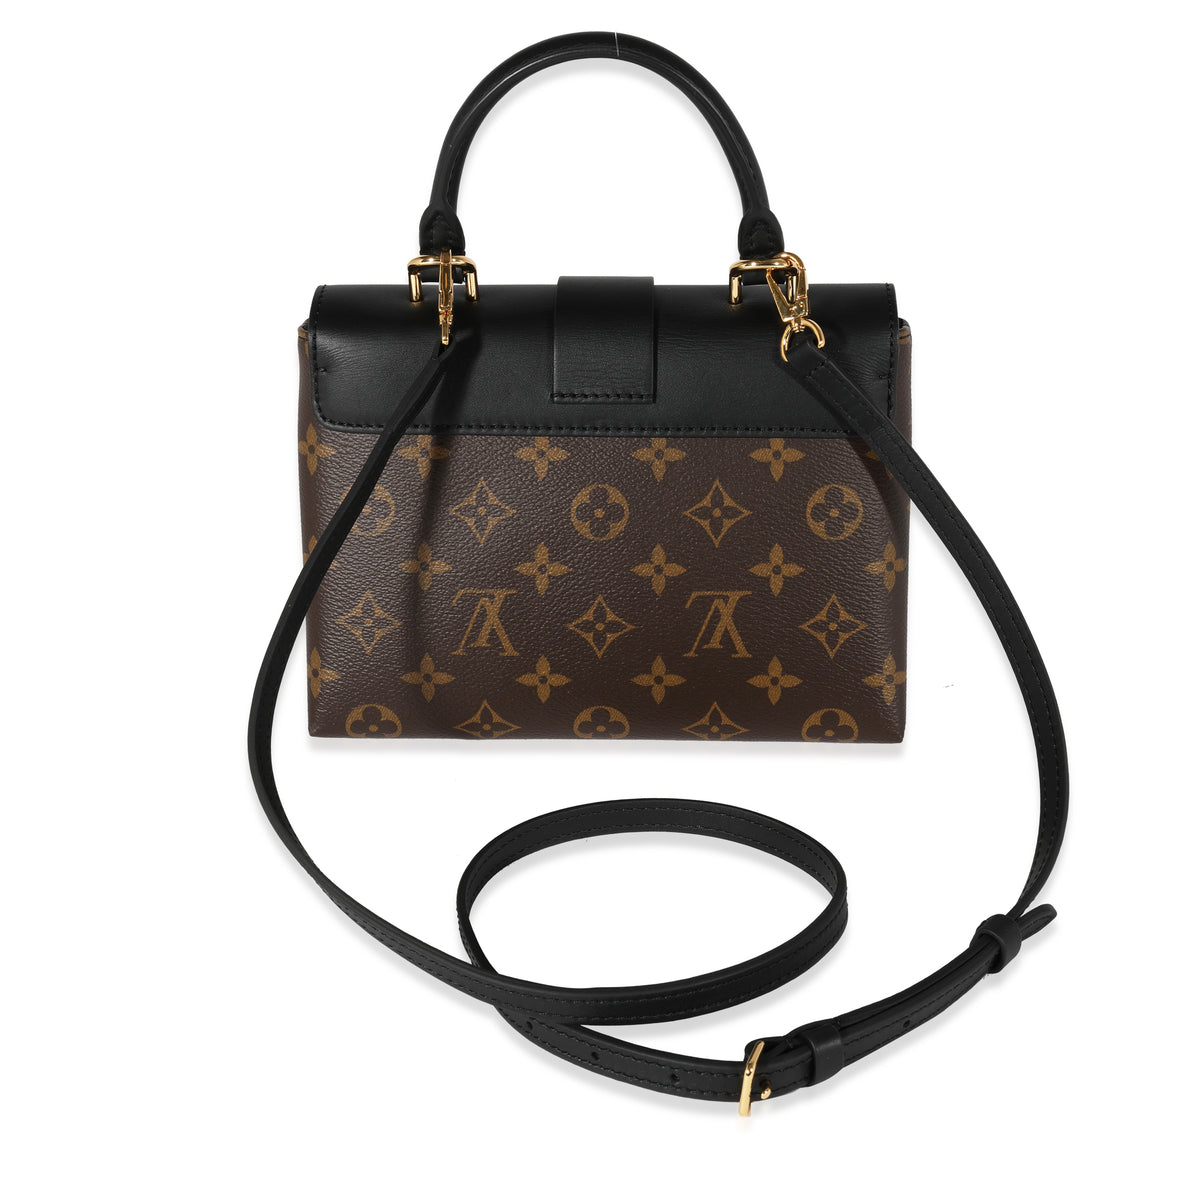 Louis Vuitton - Authenticated LOCKY Bb Handbag - Leather Black for Women, Very Good Condition